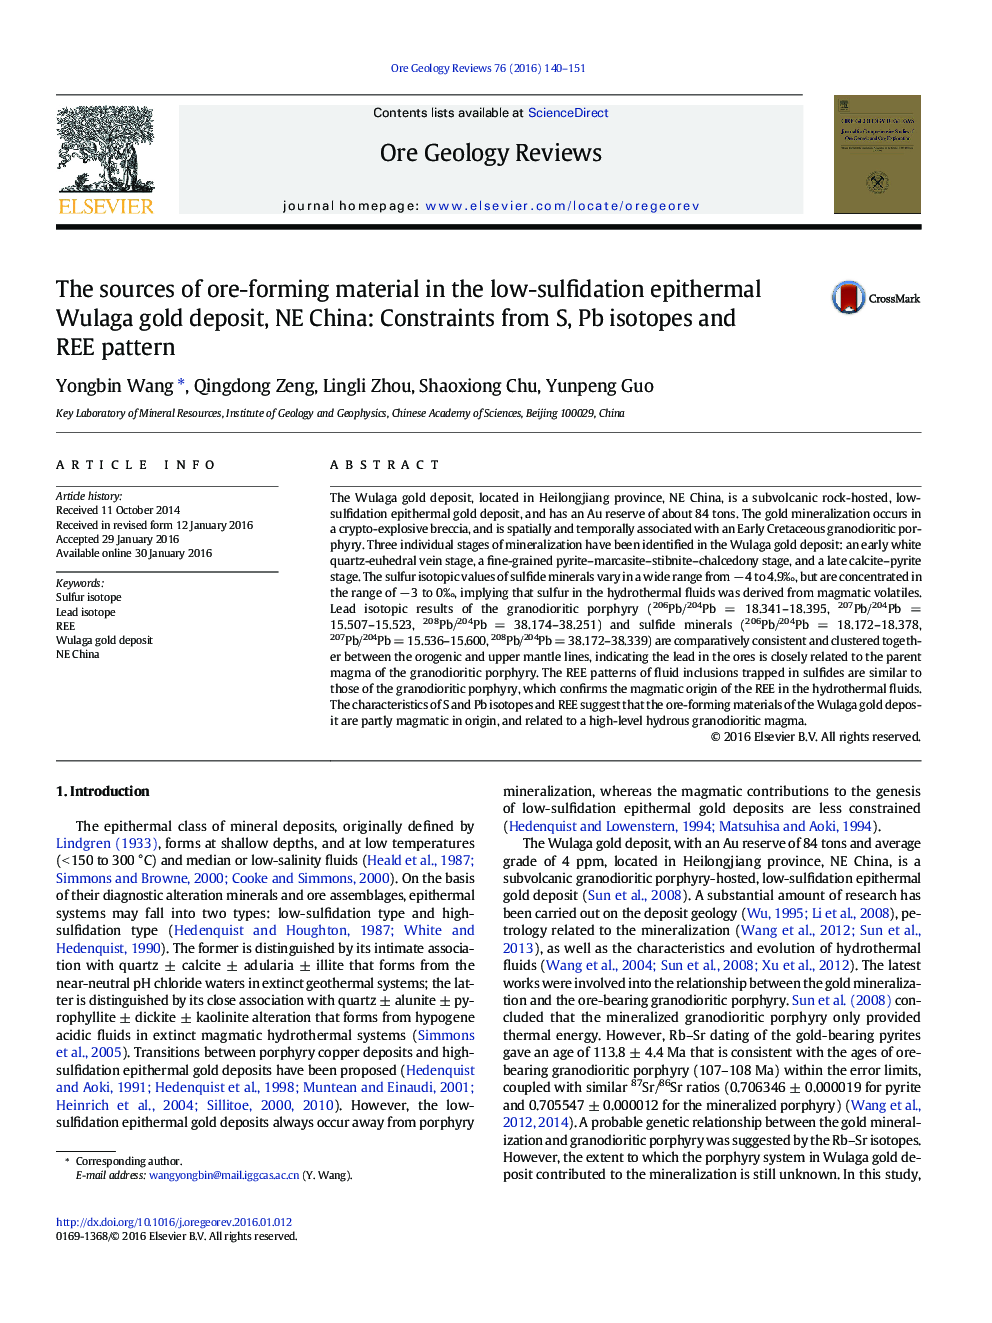 The sources of ore-forming material in the low-sulfidation epithermal Wulaga gold deposit, NE China: Constraints from S, Pb isotopes and REE pattern